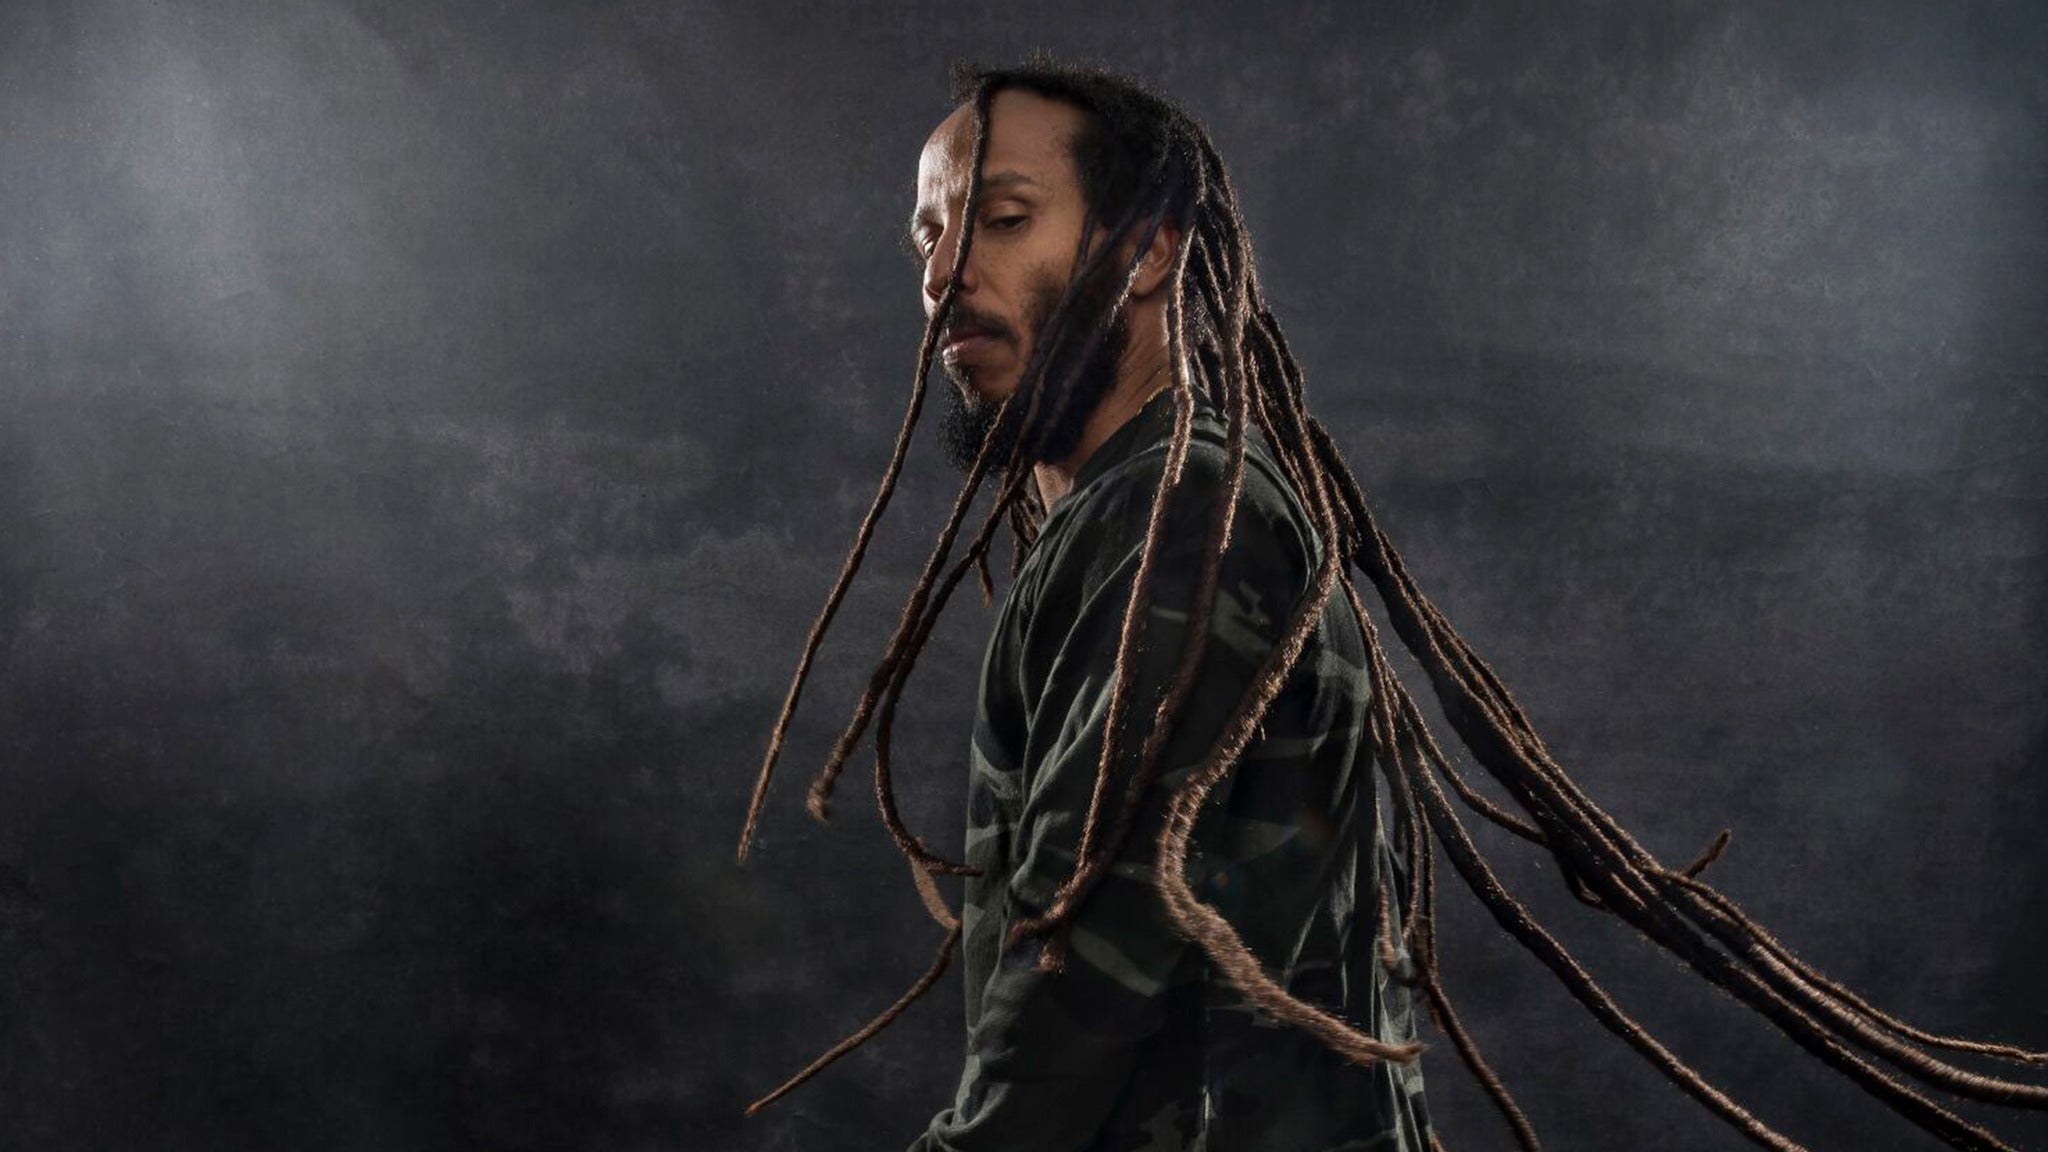 Ziggy Marley - A Live Tribute To His Father